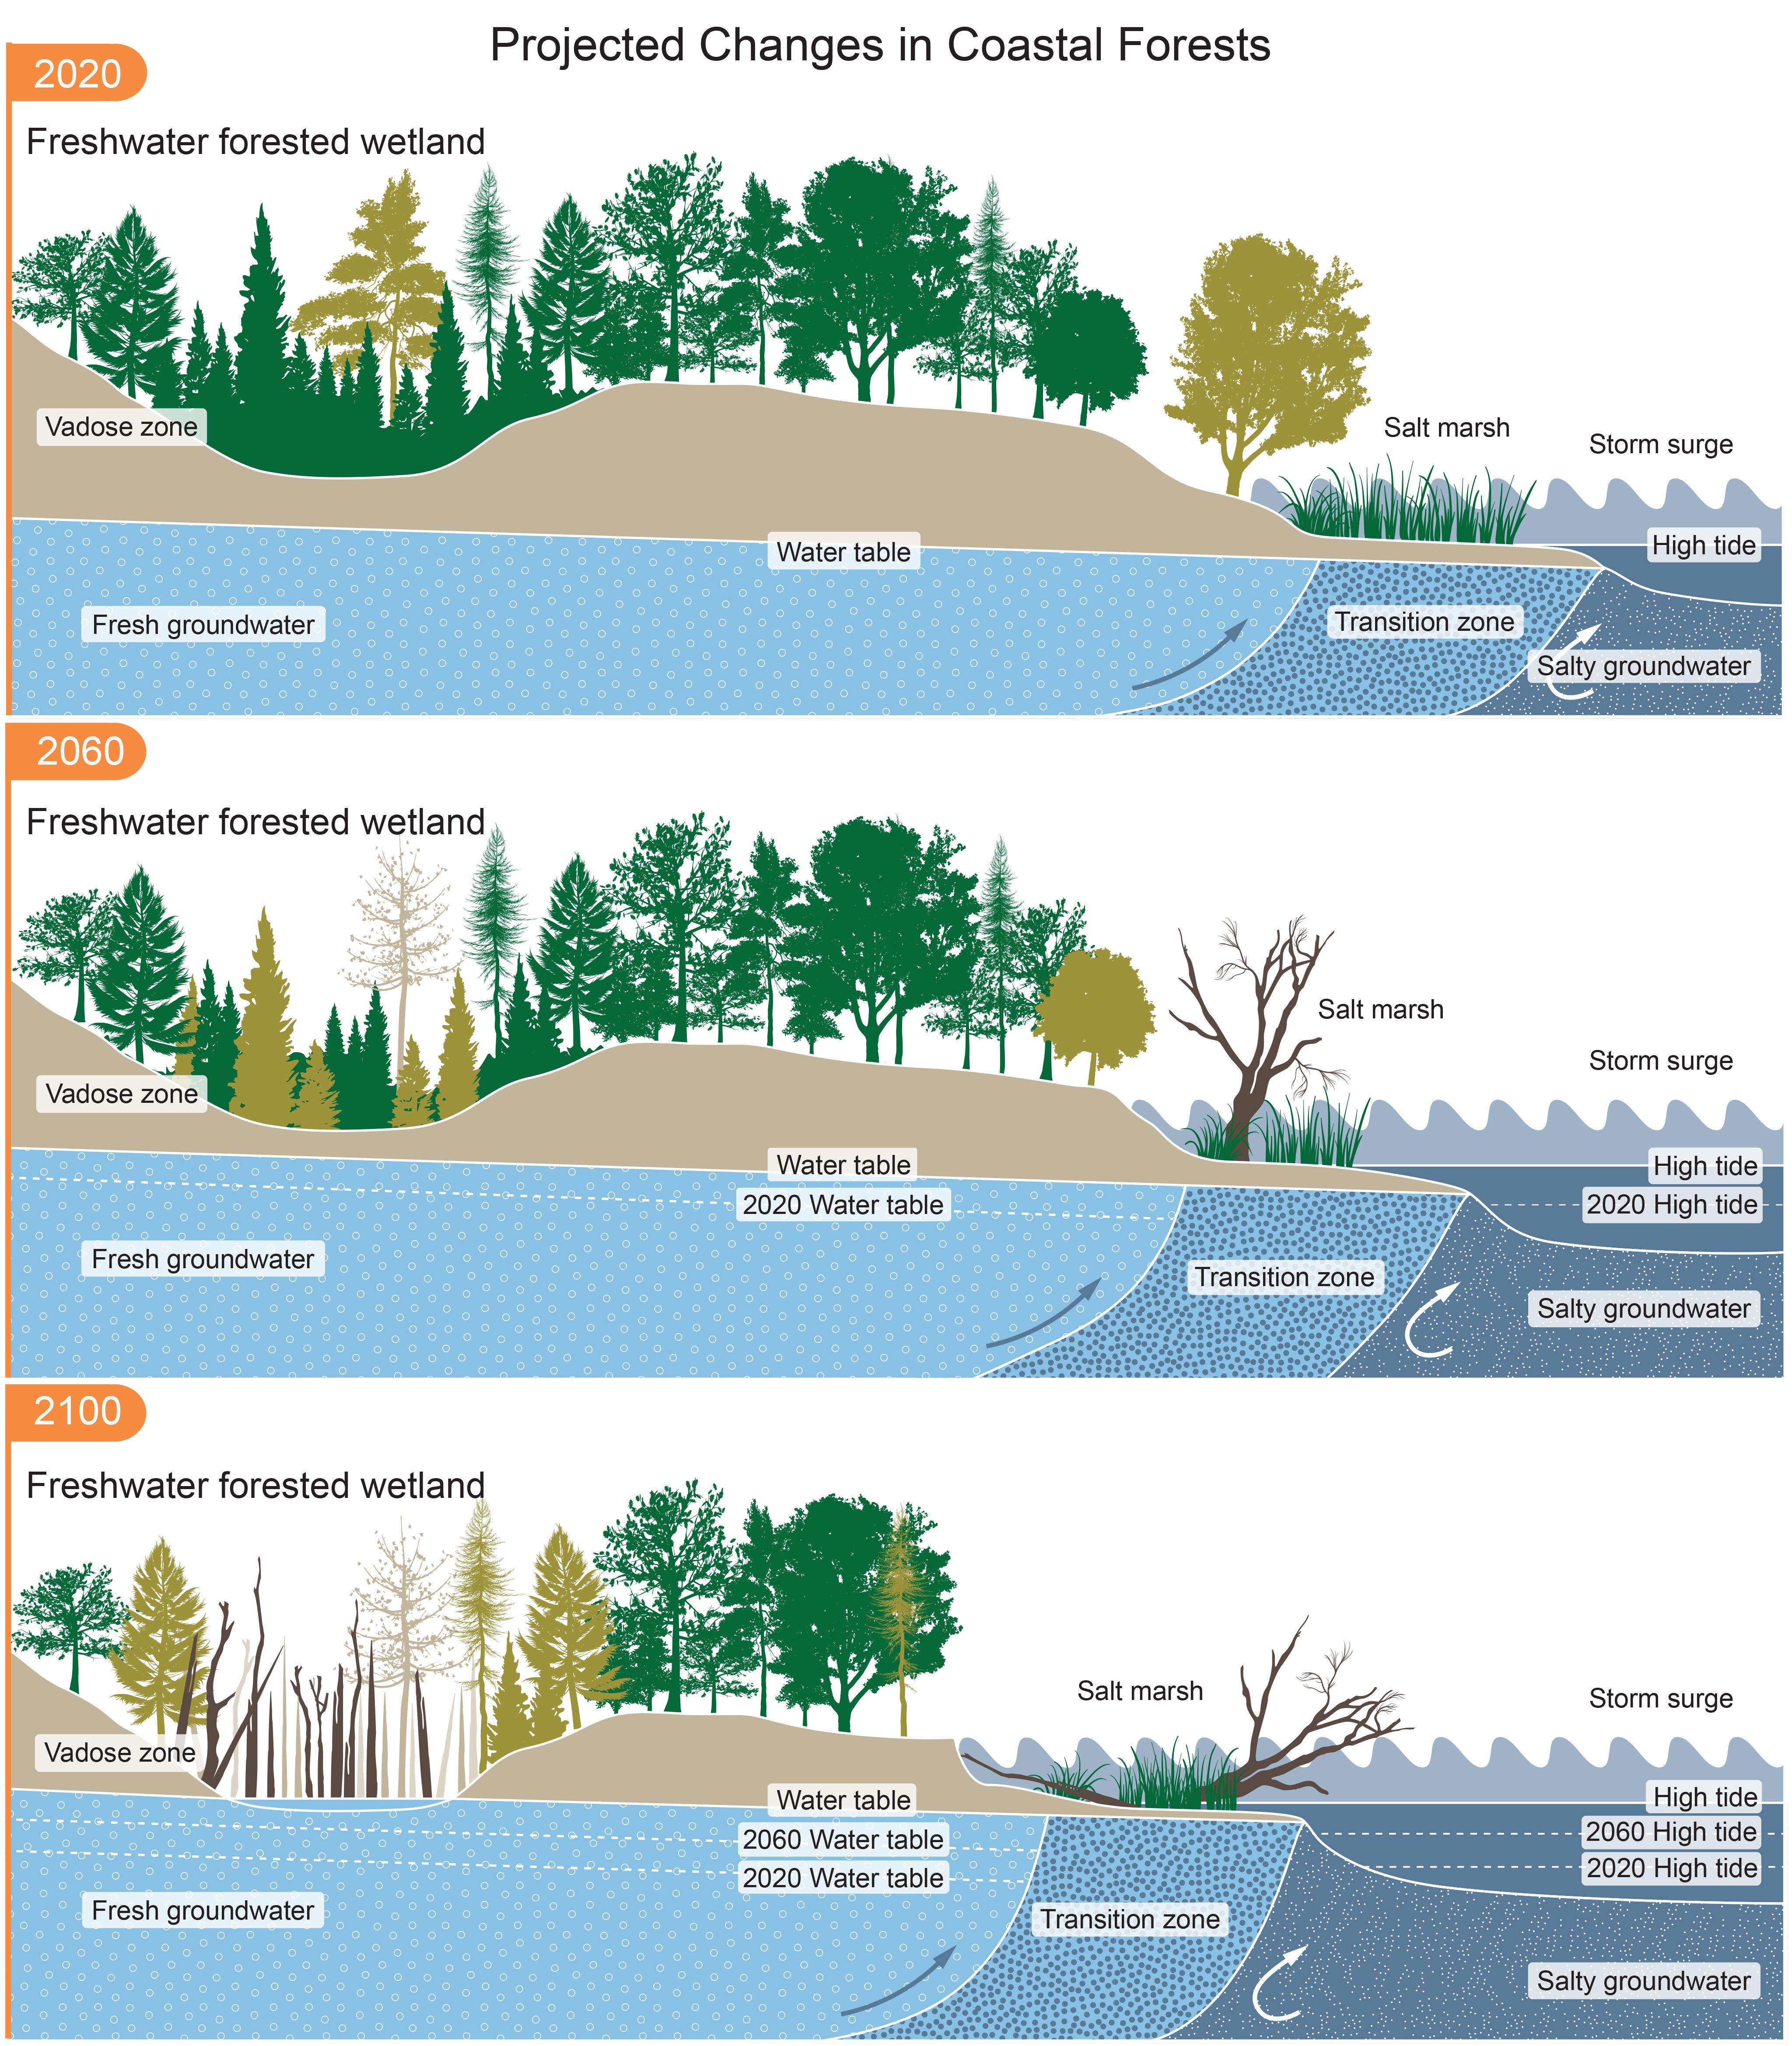 Projected Changes in Coastal Forests